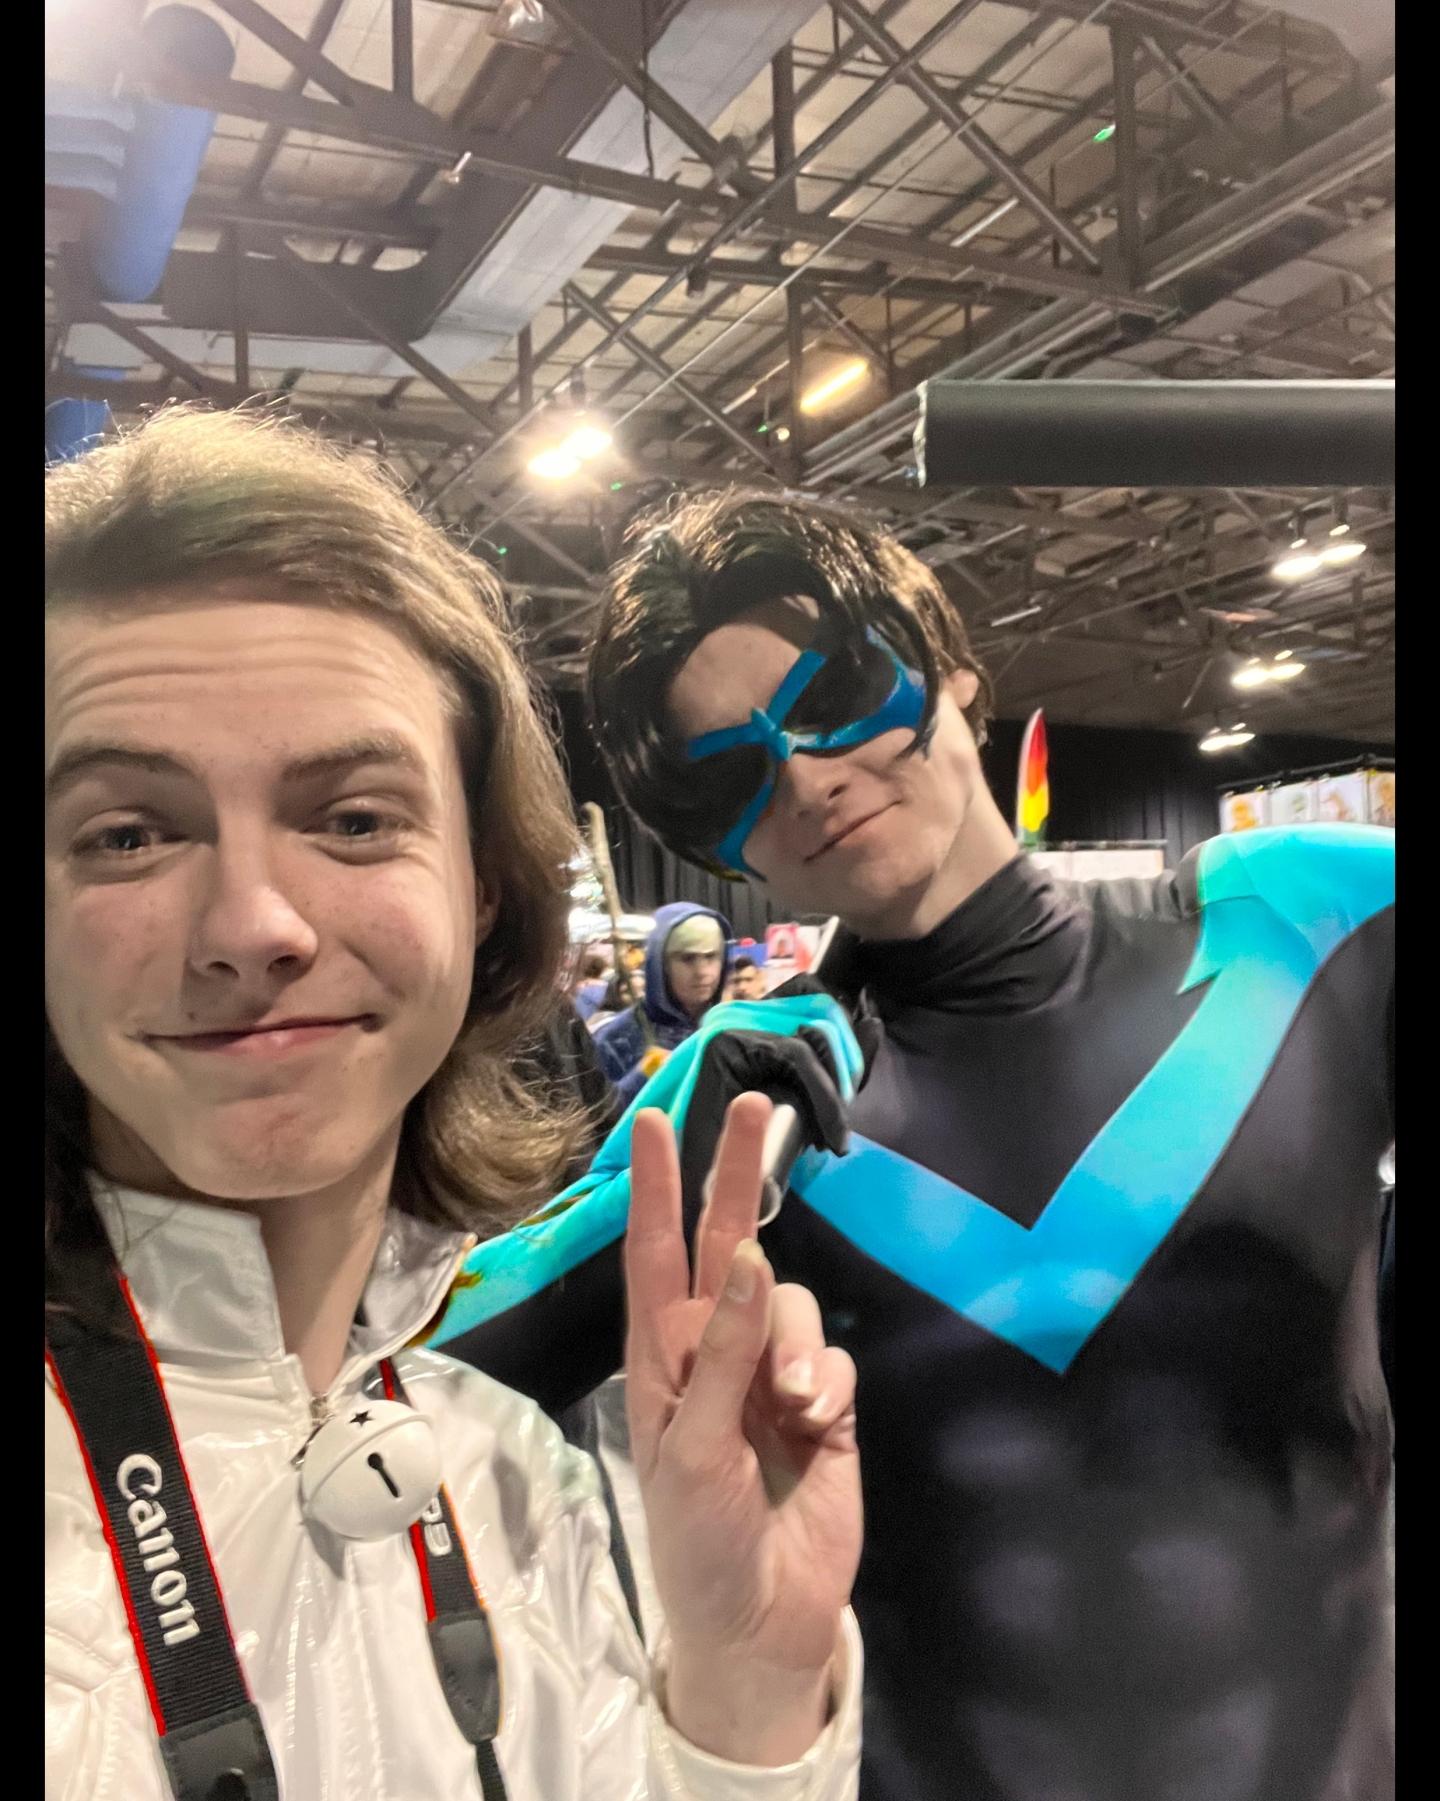 Took_A_Selfie_With_NightwingLoved_Speaking_With_HimSelfie_Cosplay_CatBlanc_MiraculousLadybug_Nightwing_DC_DavenportAtComjpg